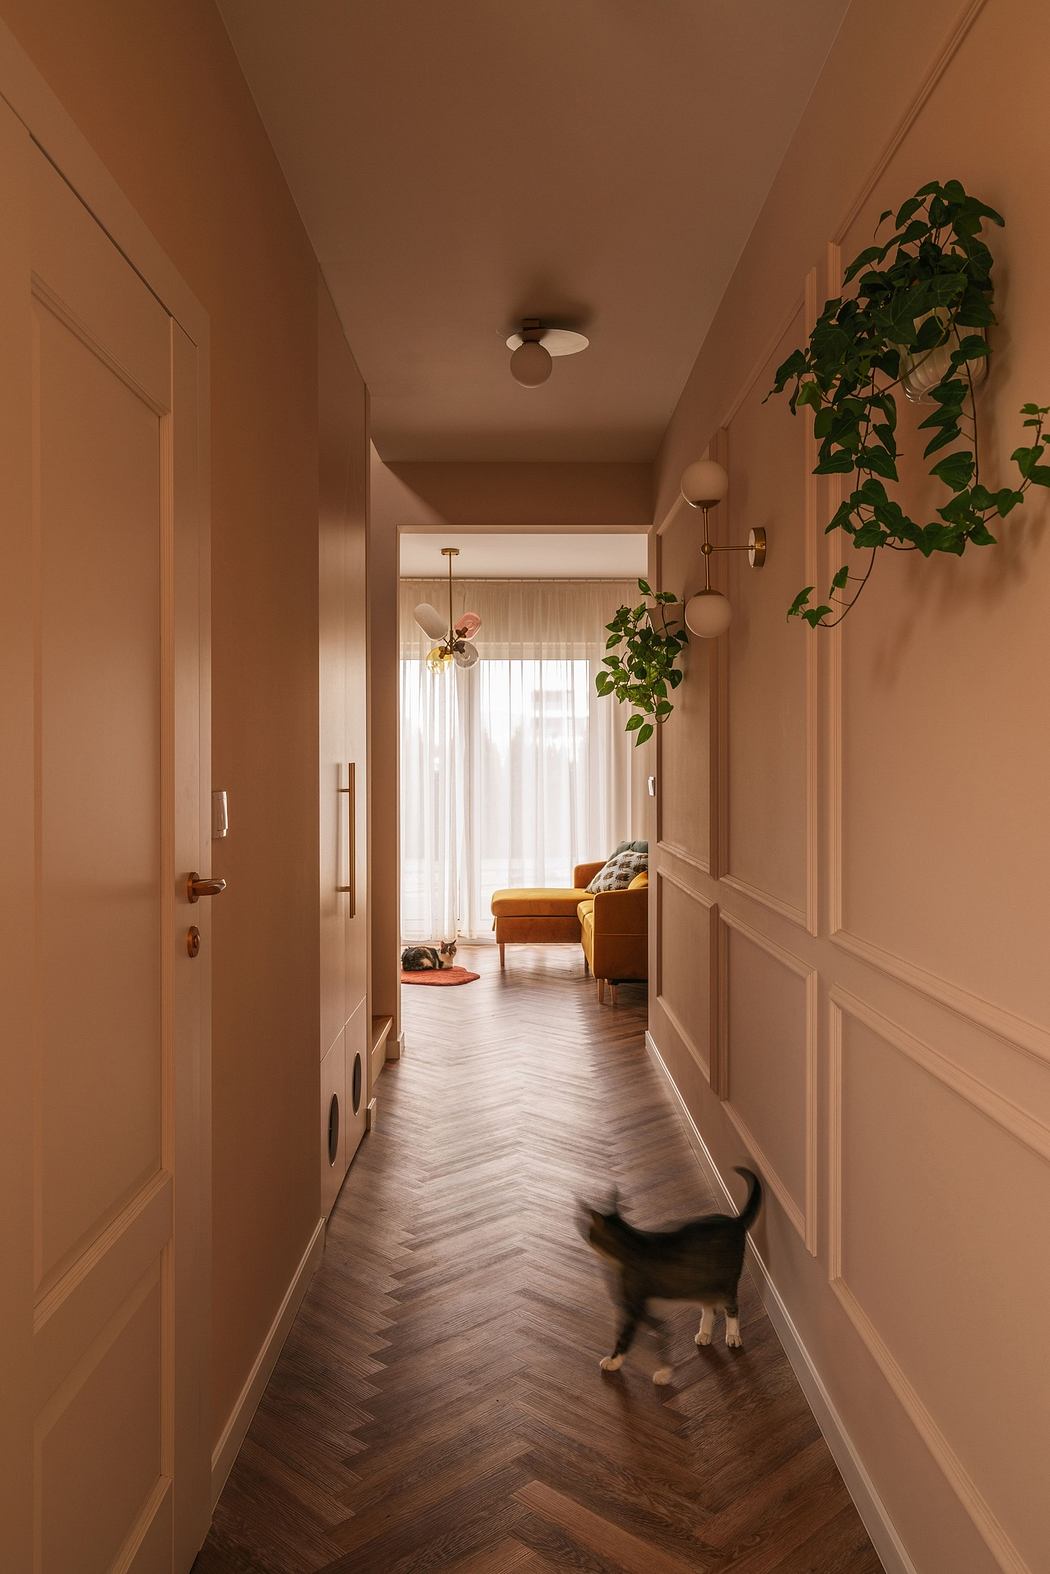 Warm-toned hallway with hardwood floors, plants, and a cat walking.